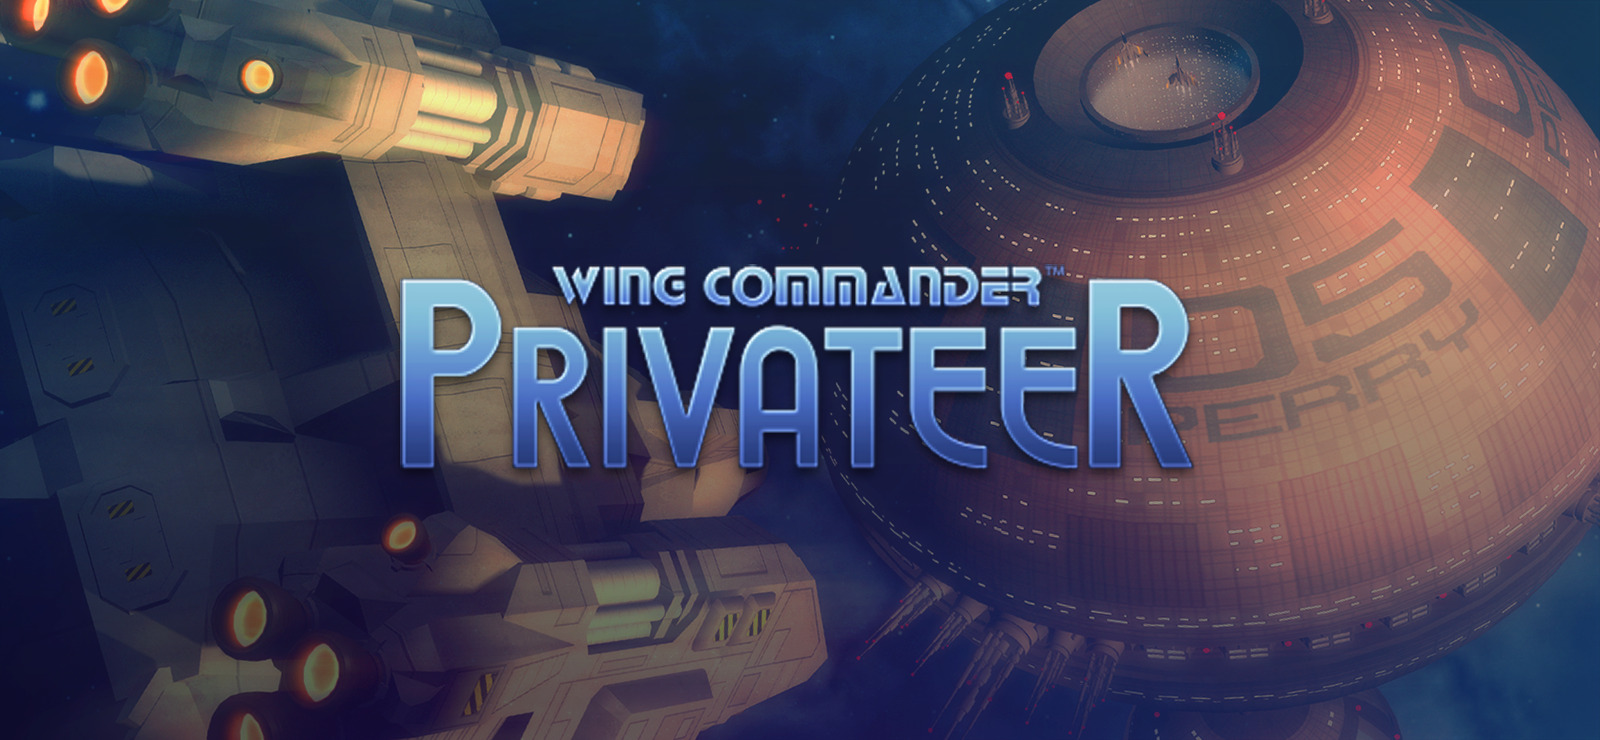 wing commander privateer option cheat effects